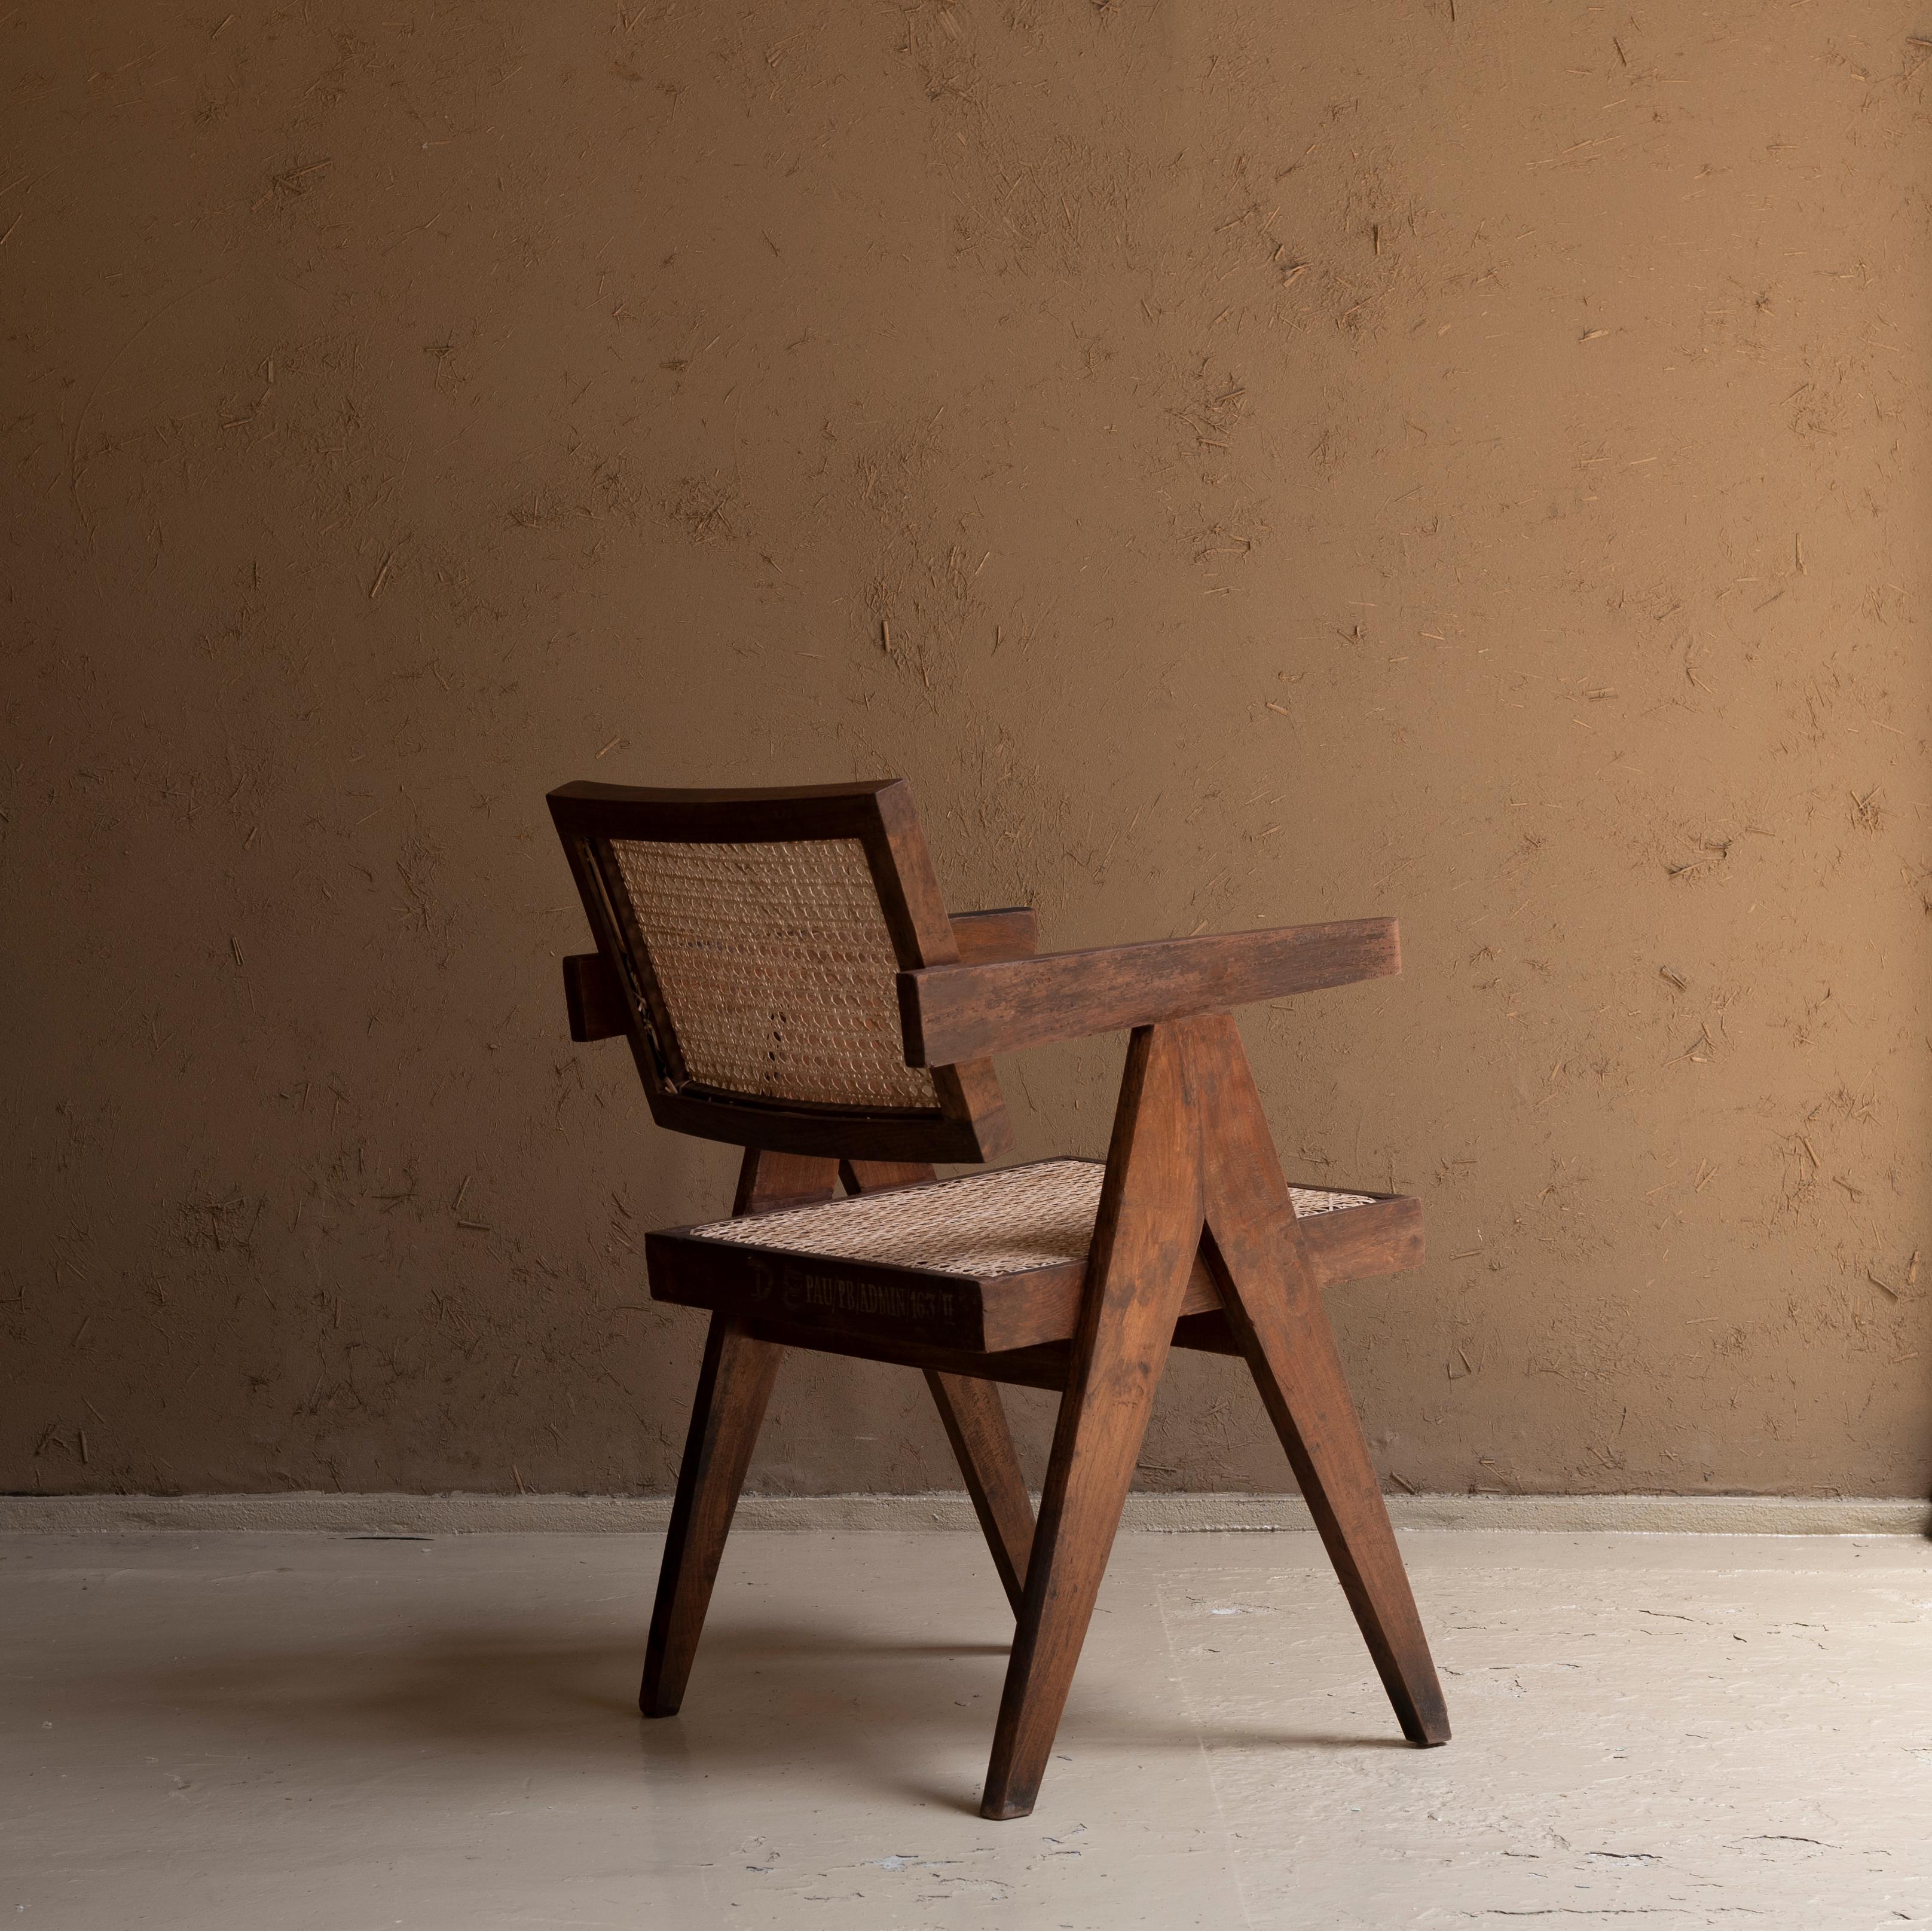 Mid-20th Century Pierre Jeanneret Office Chair, Circa 1955-56, Punjab Agricultural University For Sale